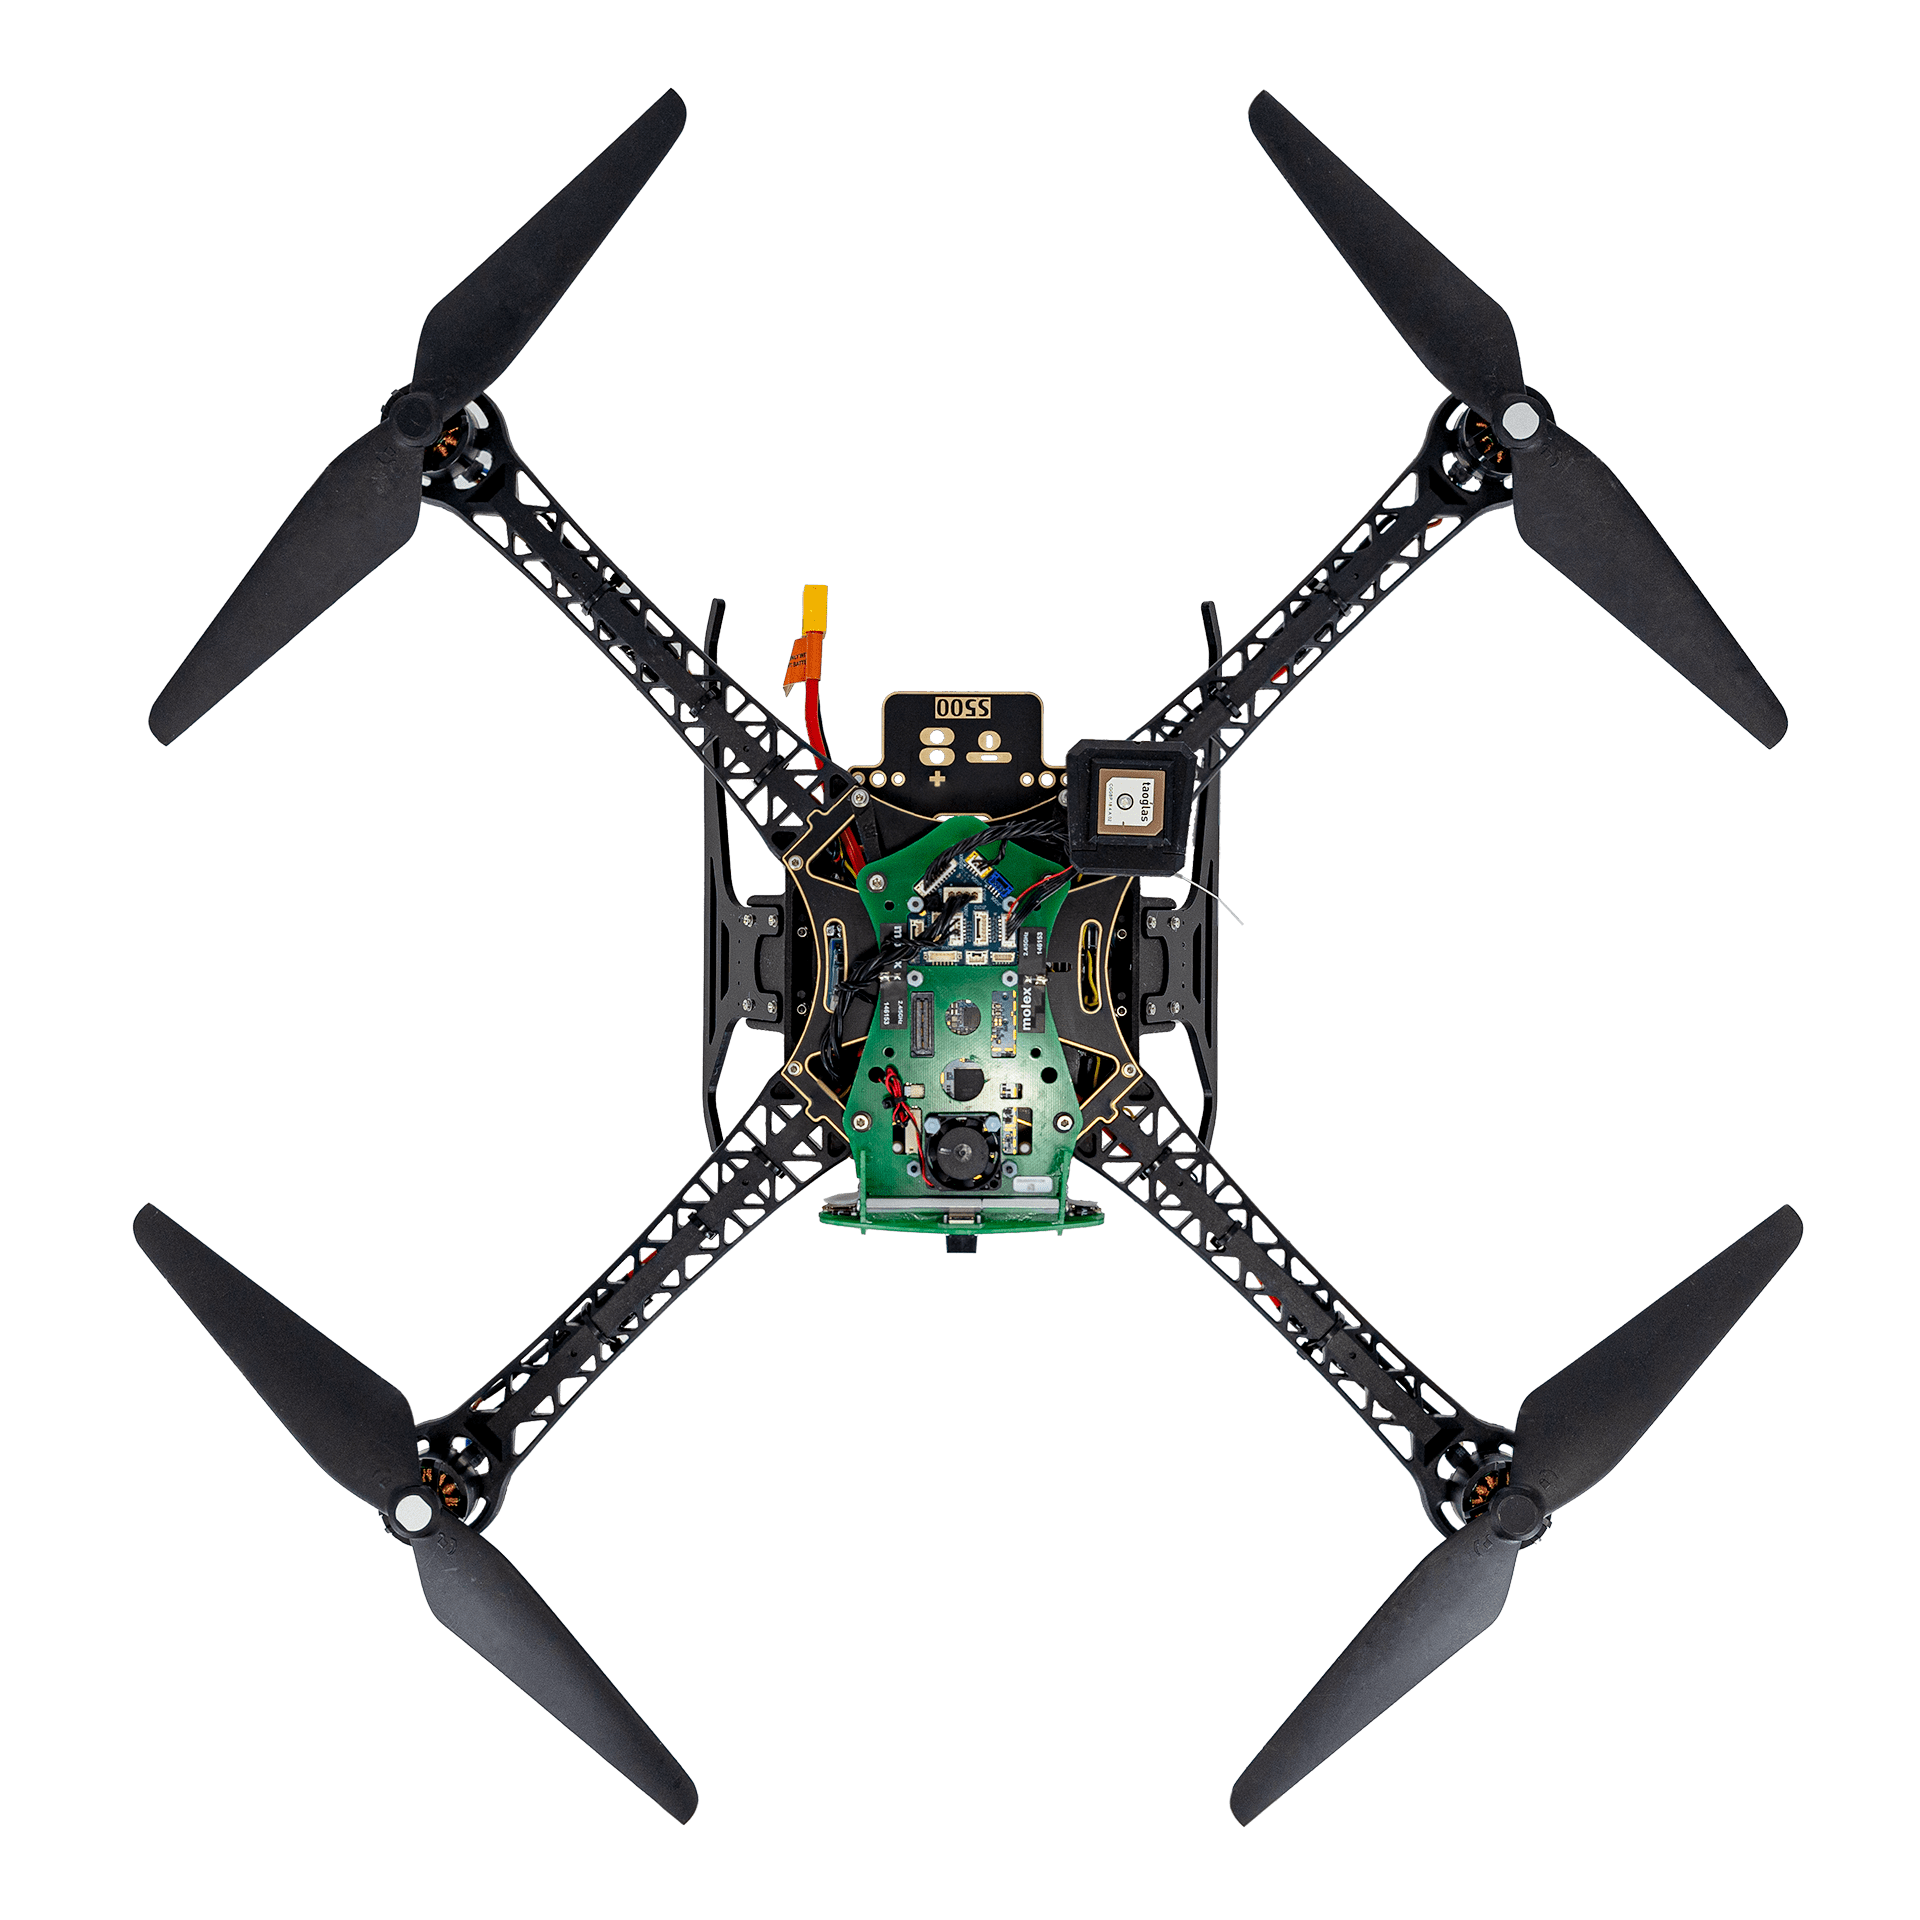 Development Drone PX4 GPS-Denied Navigation and Obstacle Avoidance